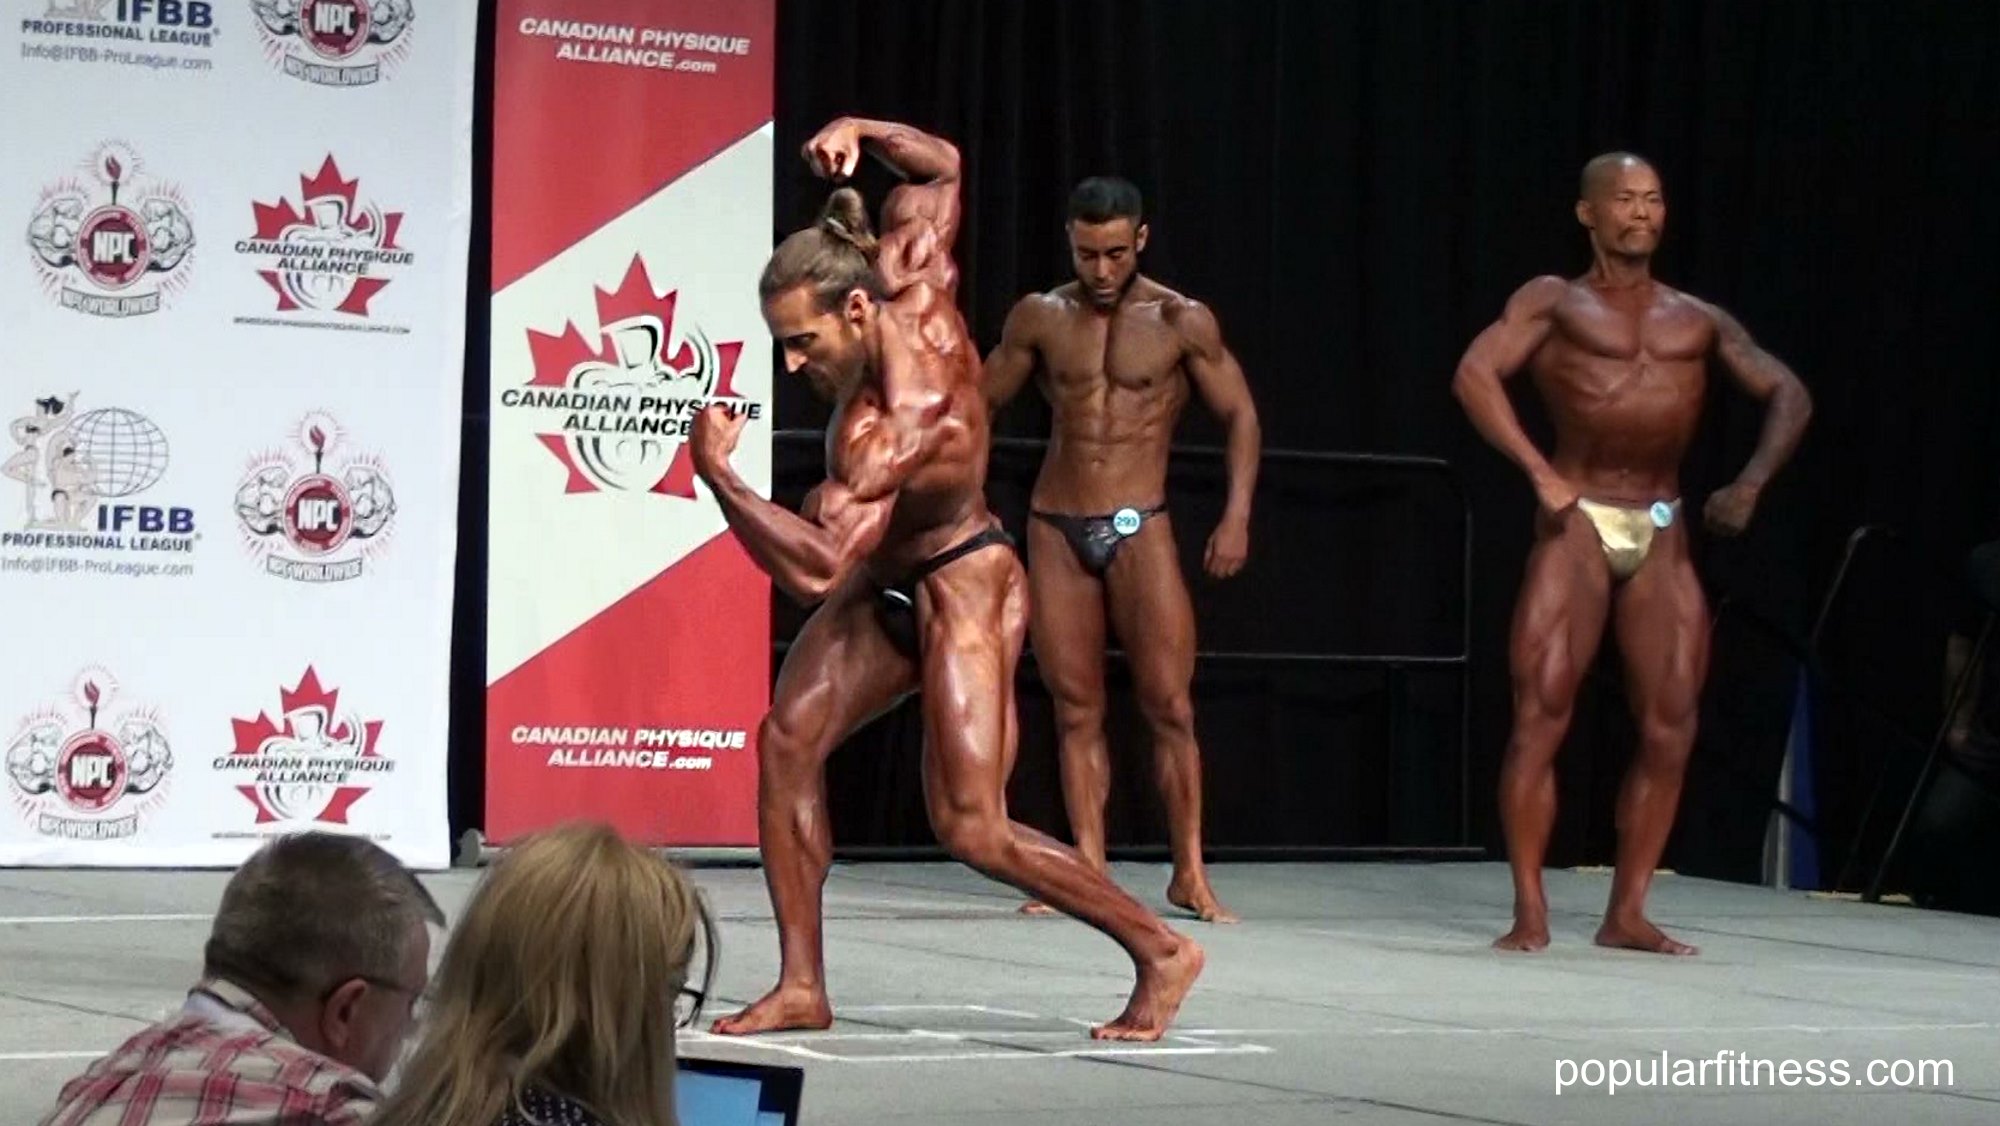 Beautiful biceps pose by bodybuilder at bodybuilding fitness competition